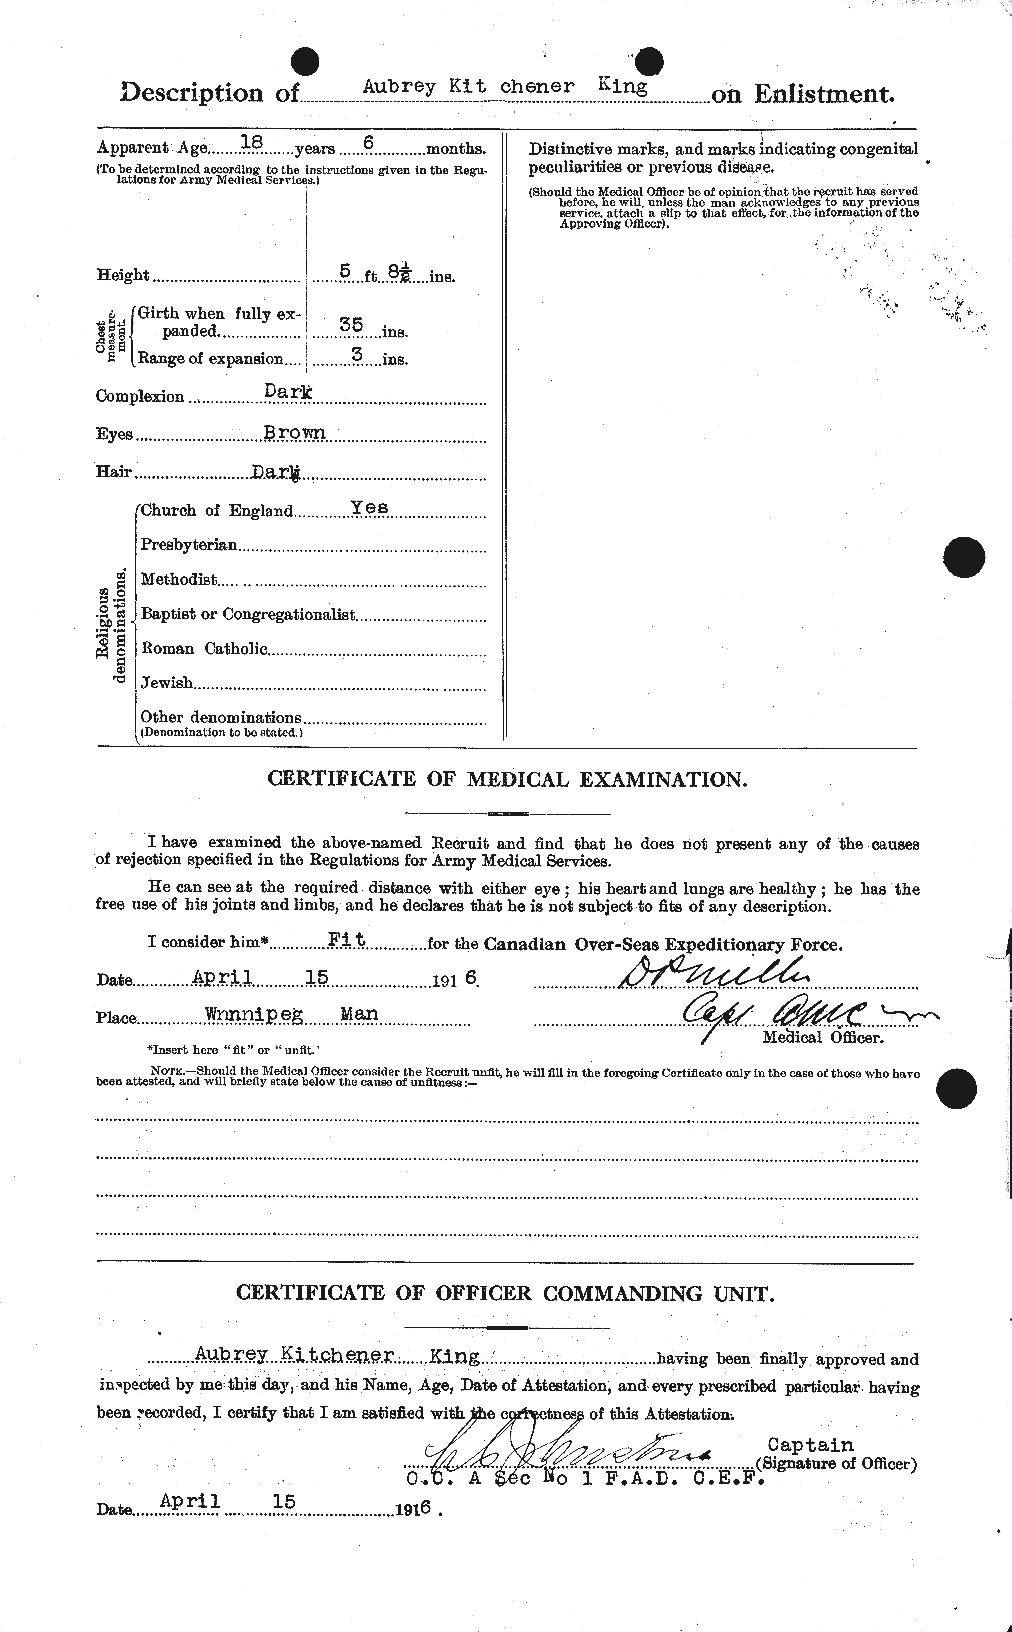 Personnel Records of the First World War - CEF 437720b